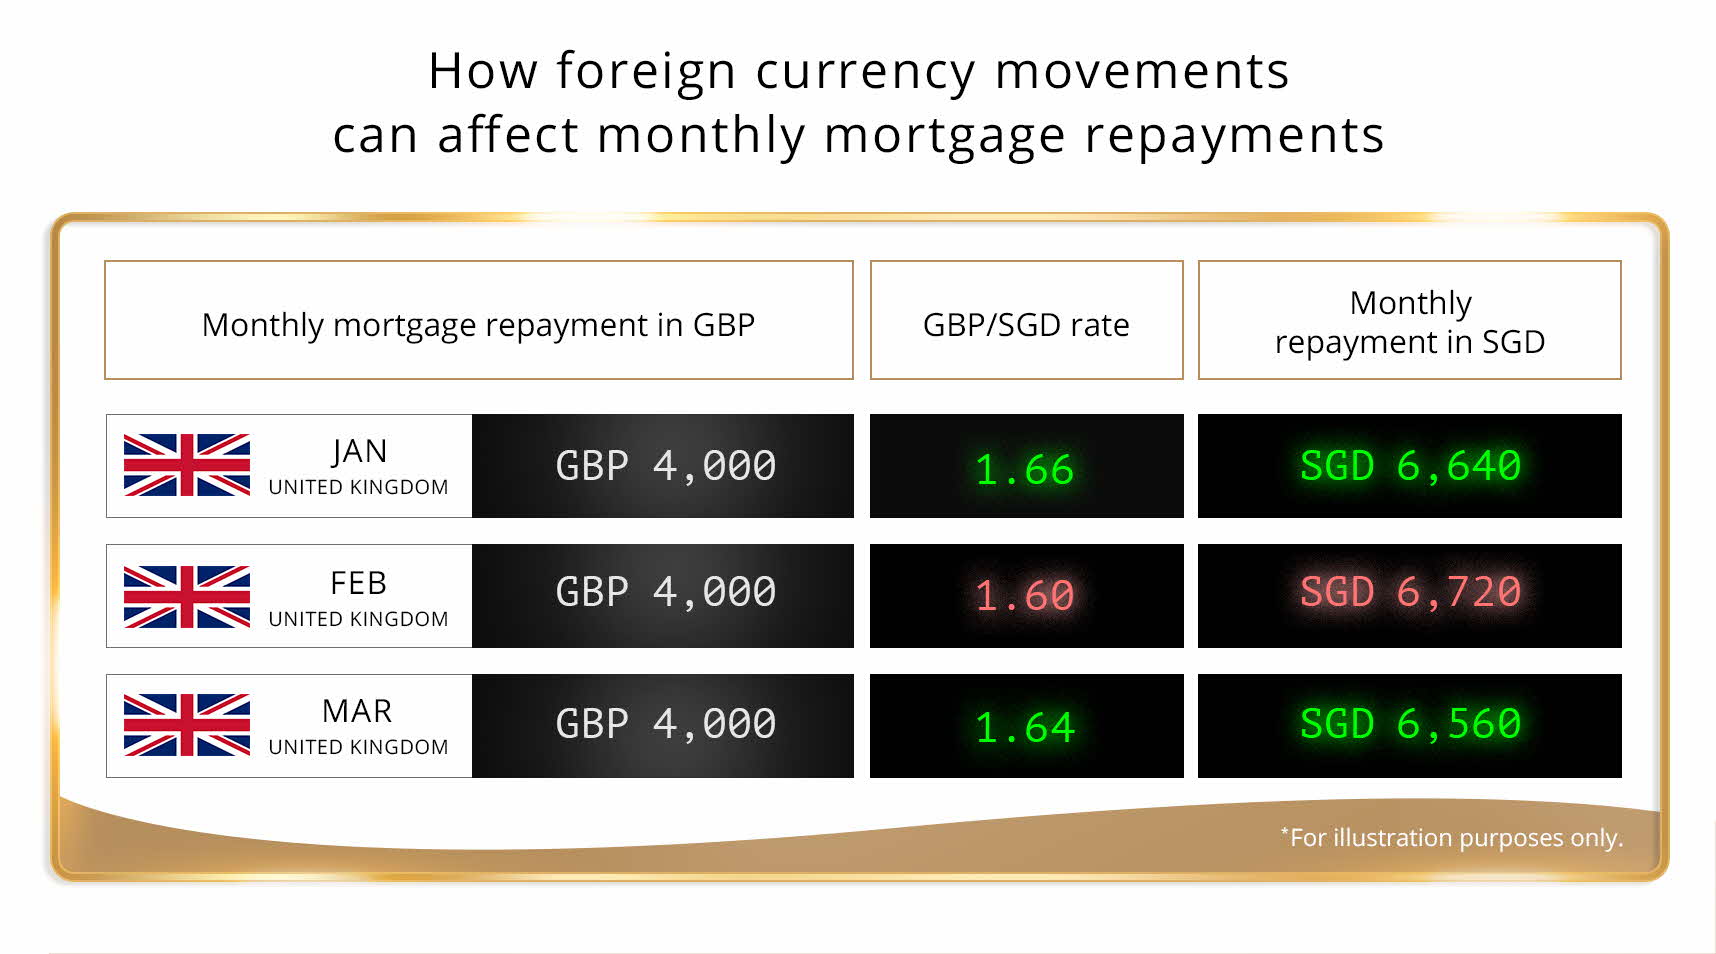 How foreign currency movements can affect monthly mortgage repayments